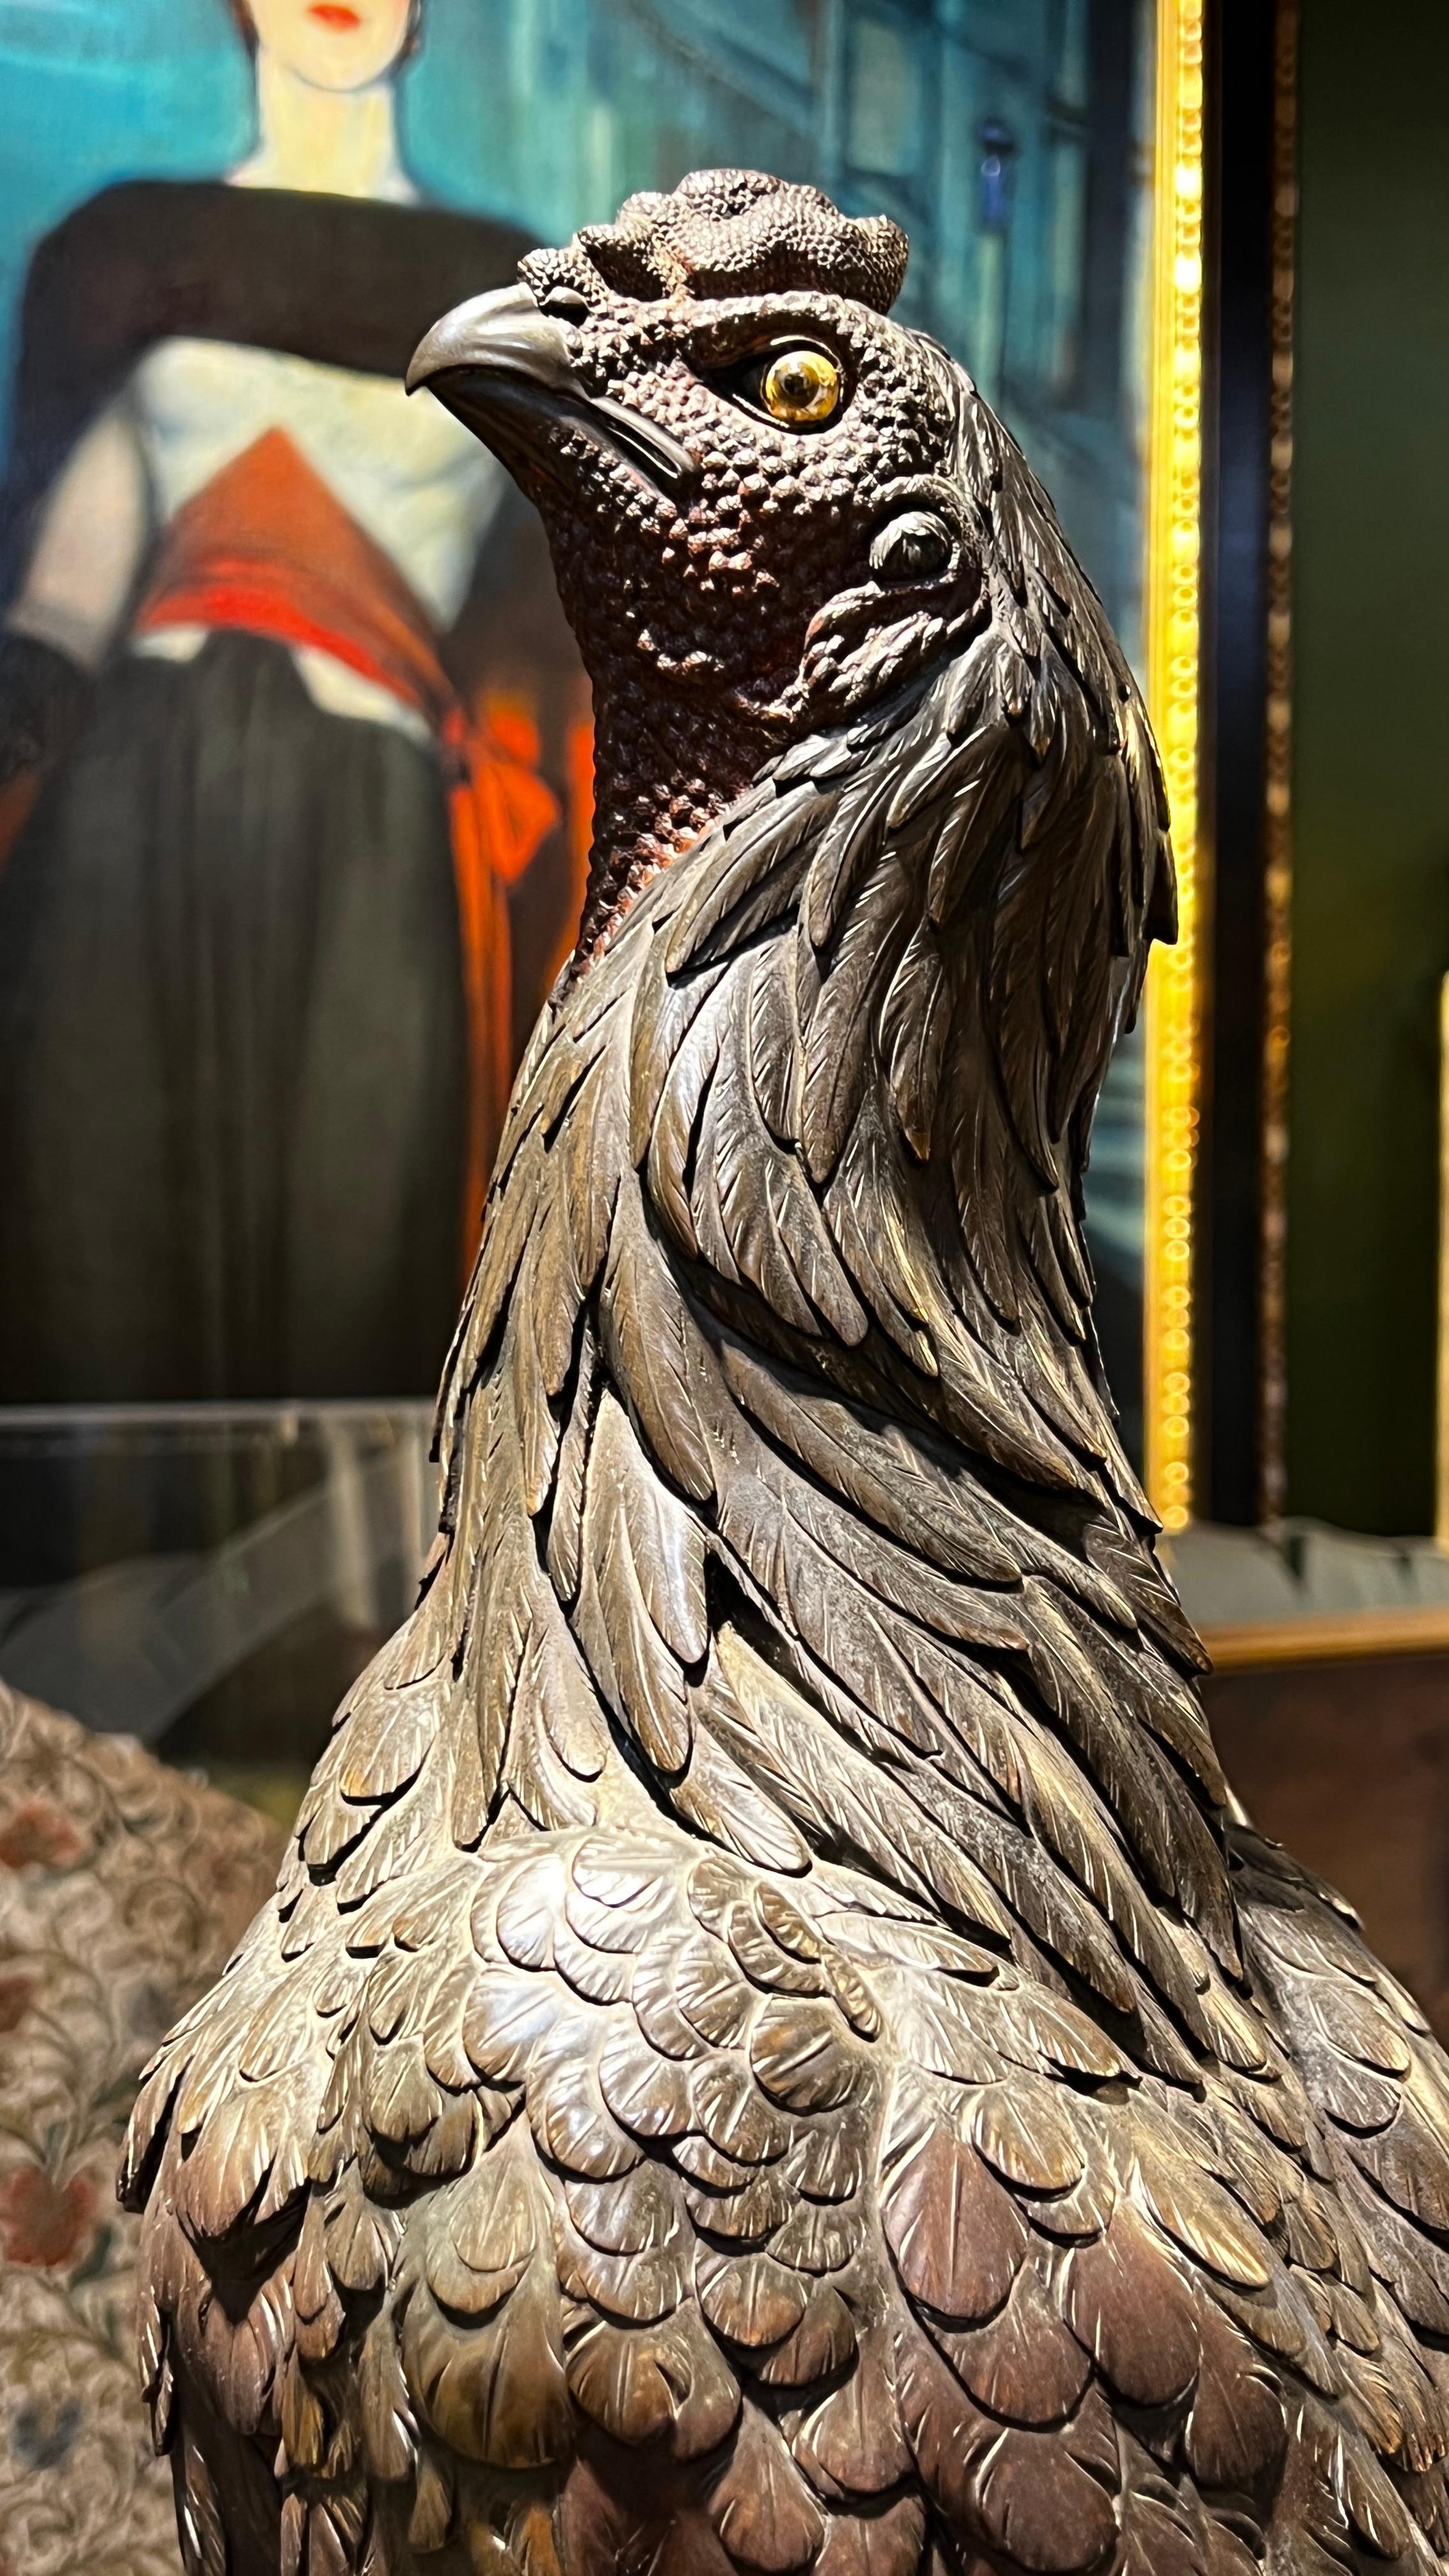 Our magnificent bronze figure of a cockerel (rooster) by Hideyoshi Seizo dates from the late Meiji period. Patinated with the tail feathers finished in shakudo and body feathers in copper and brown shades with gilded patches, with additional traces